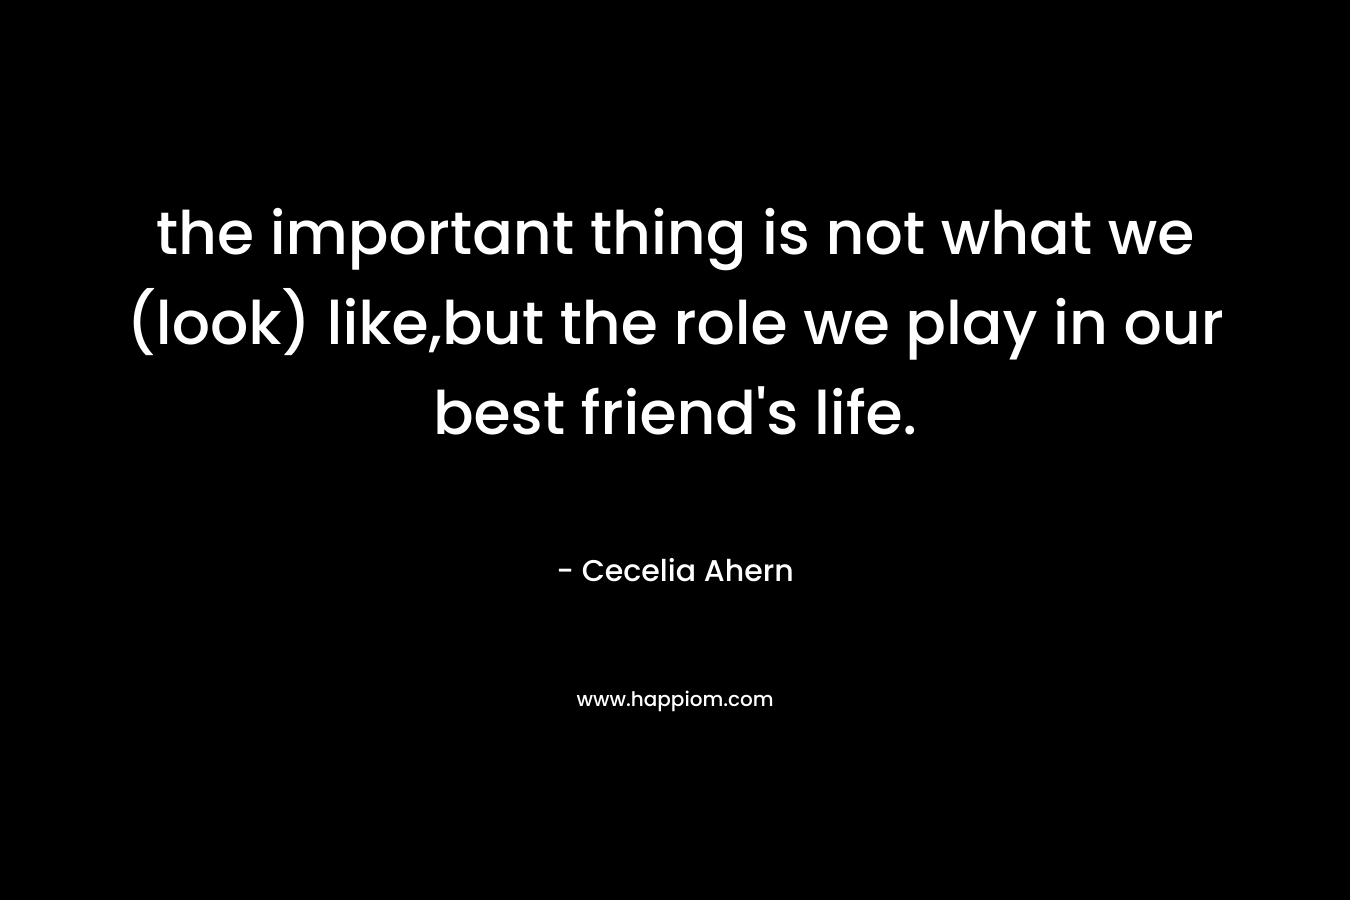 the important thing is not what we (look) like,but the role we play in our best friend's life.